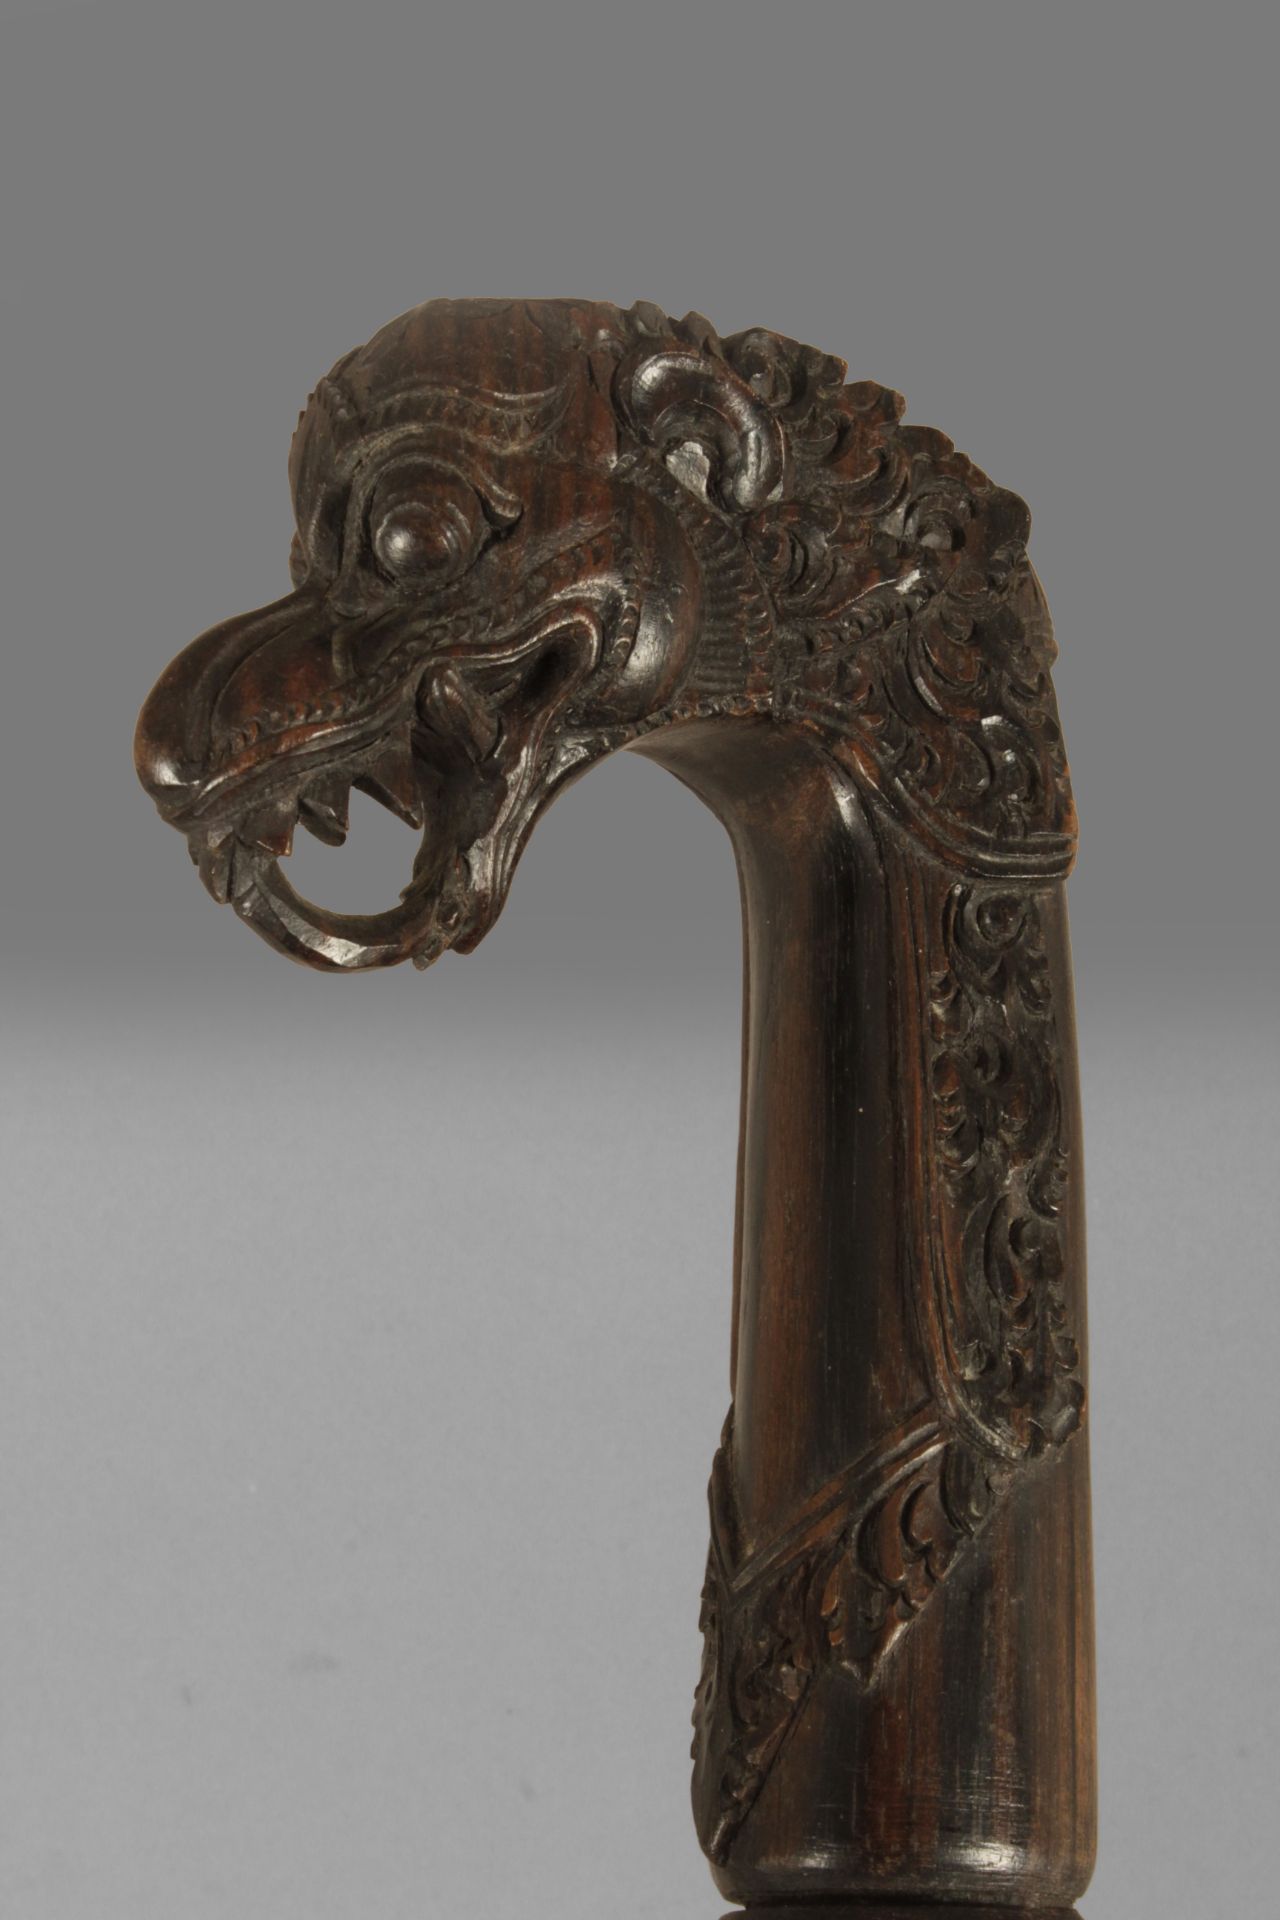 A 20th century Chinese walking stick from the Republic period. - Image 2 of 4